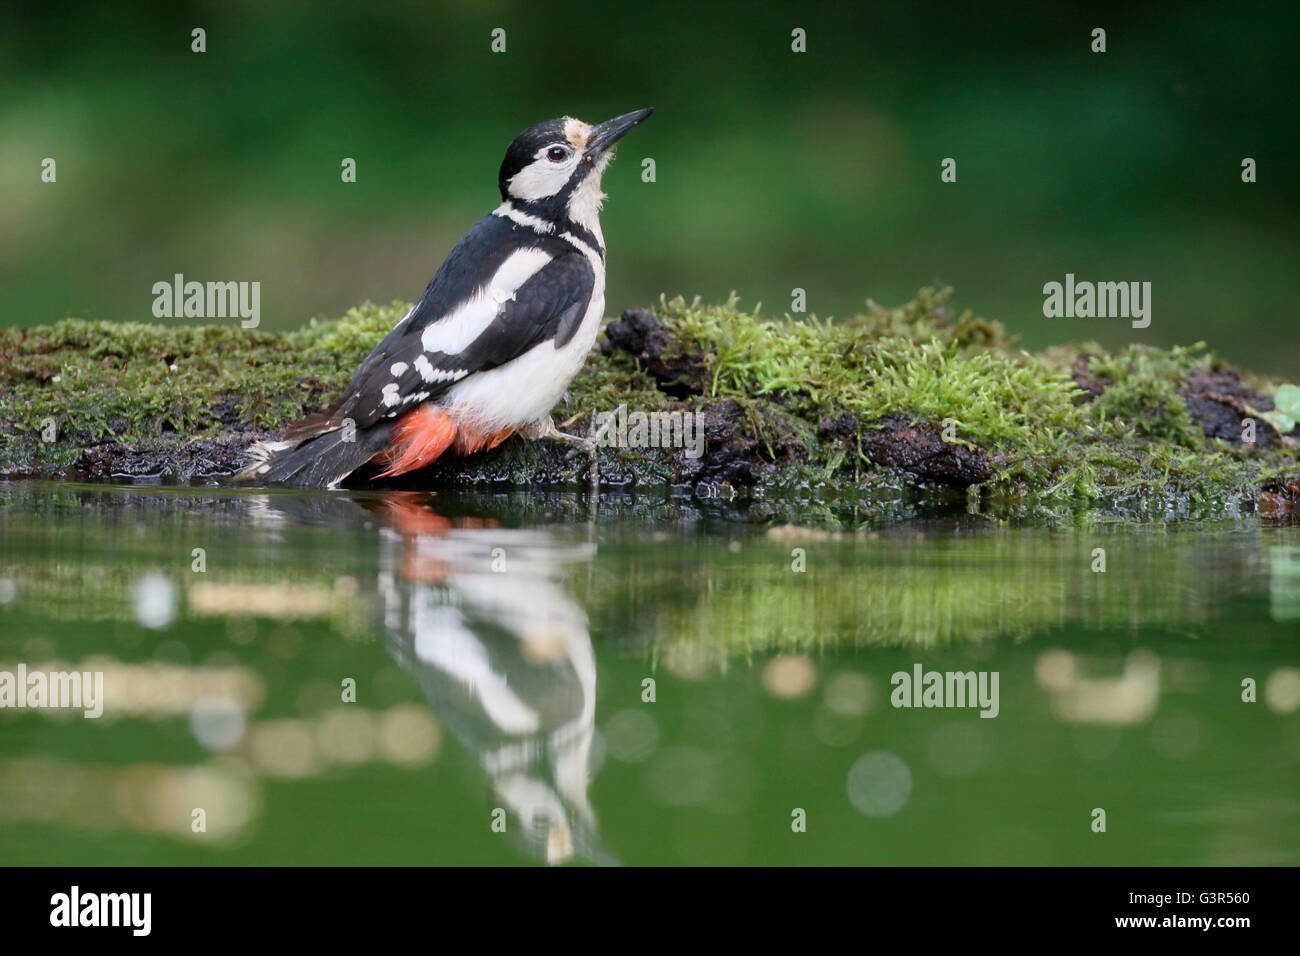 Great-spotted woodpecker, Dendrocopos major, single female in water, Hungary, May 2016 Stock Photo